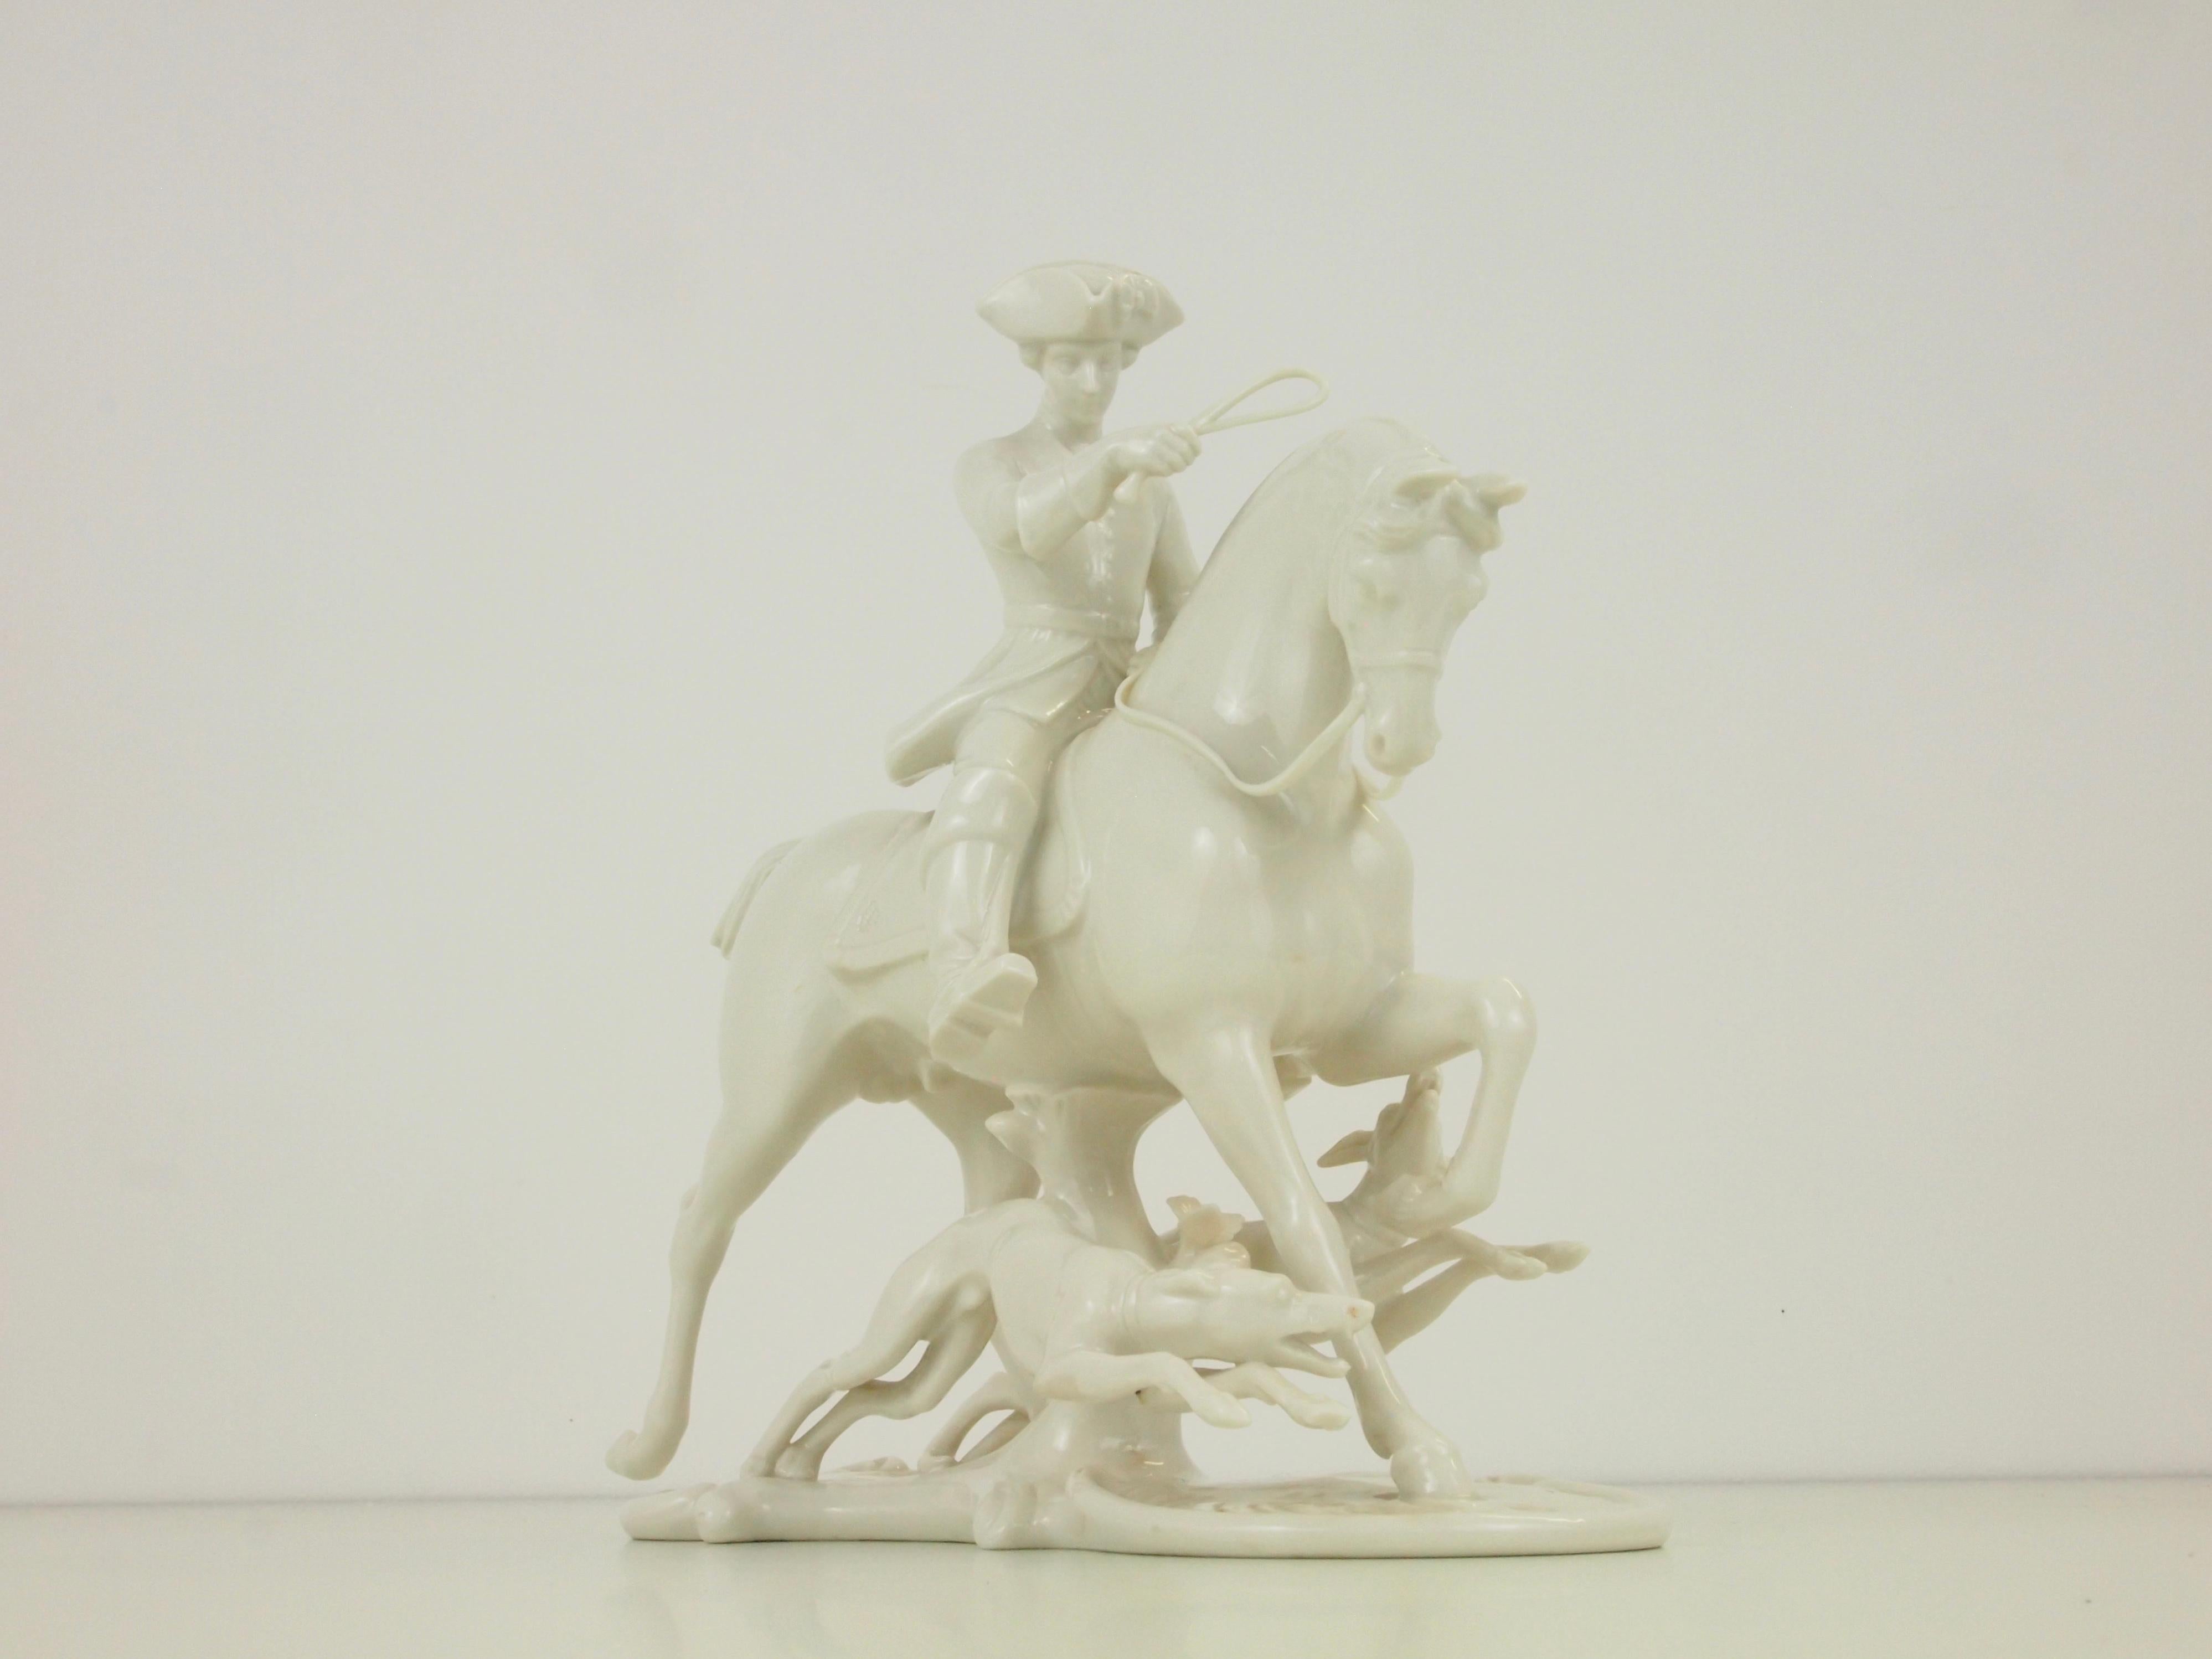 Nymphenburg Porcelain Figurine Depicting a Horse Rider in a Hunting Scene For Sale 3